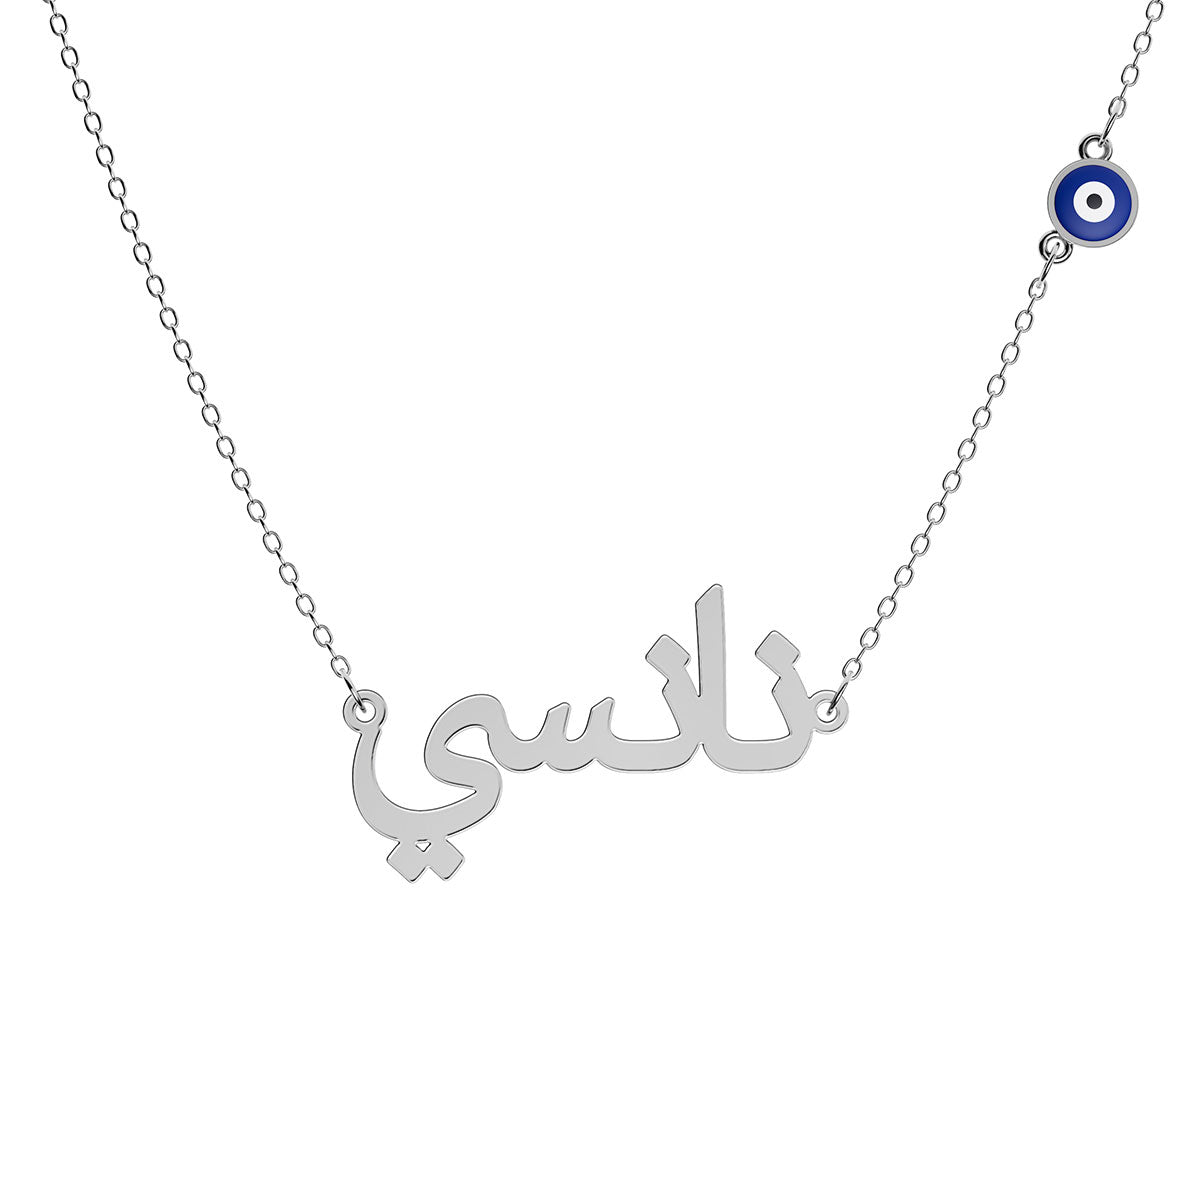 Arabic Personalized Name Necklace With Round Evil Eye Chain Charm